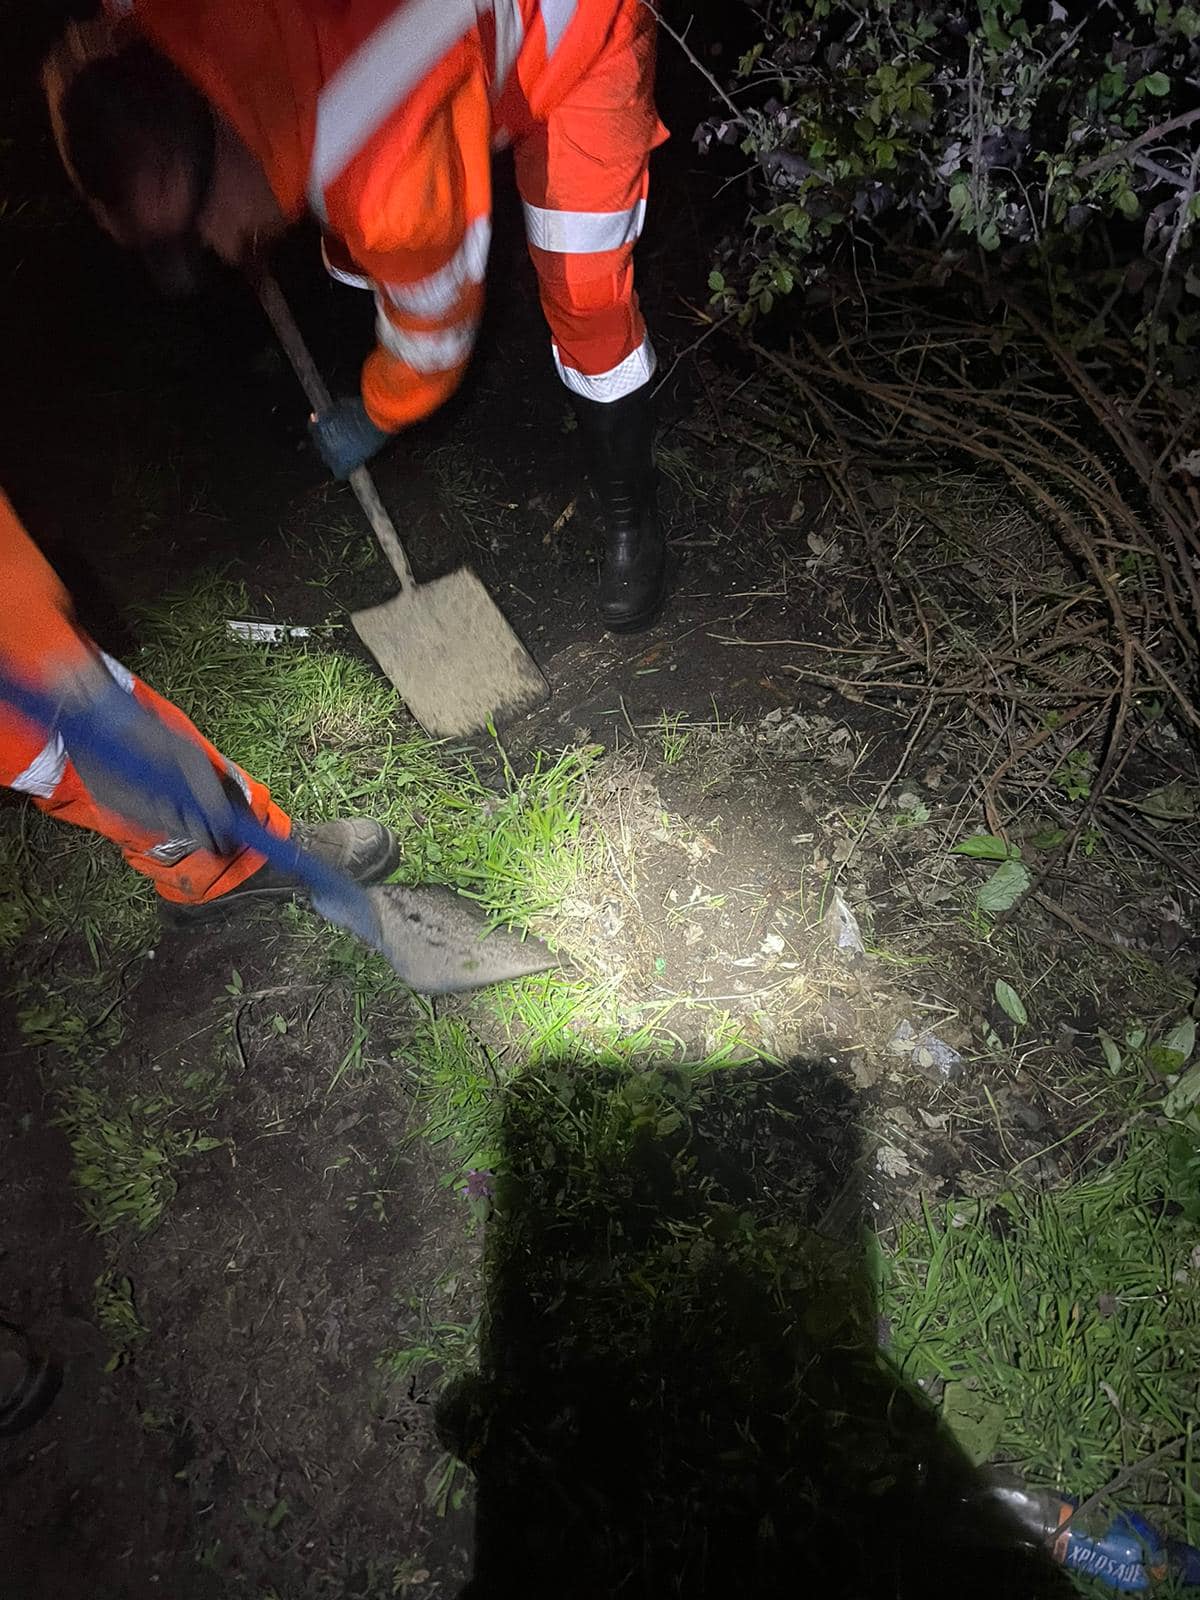 Working onsite at night, the lower extremity of two employees wearing orange hi-vis are pictured shovelling soil on a grassy, muddy field.